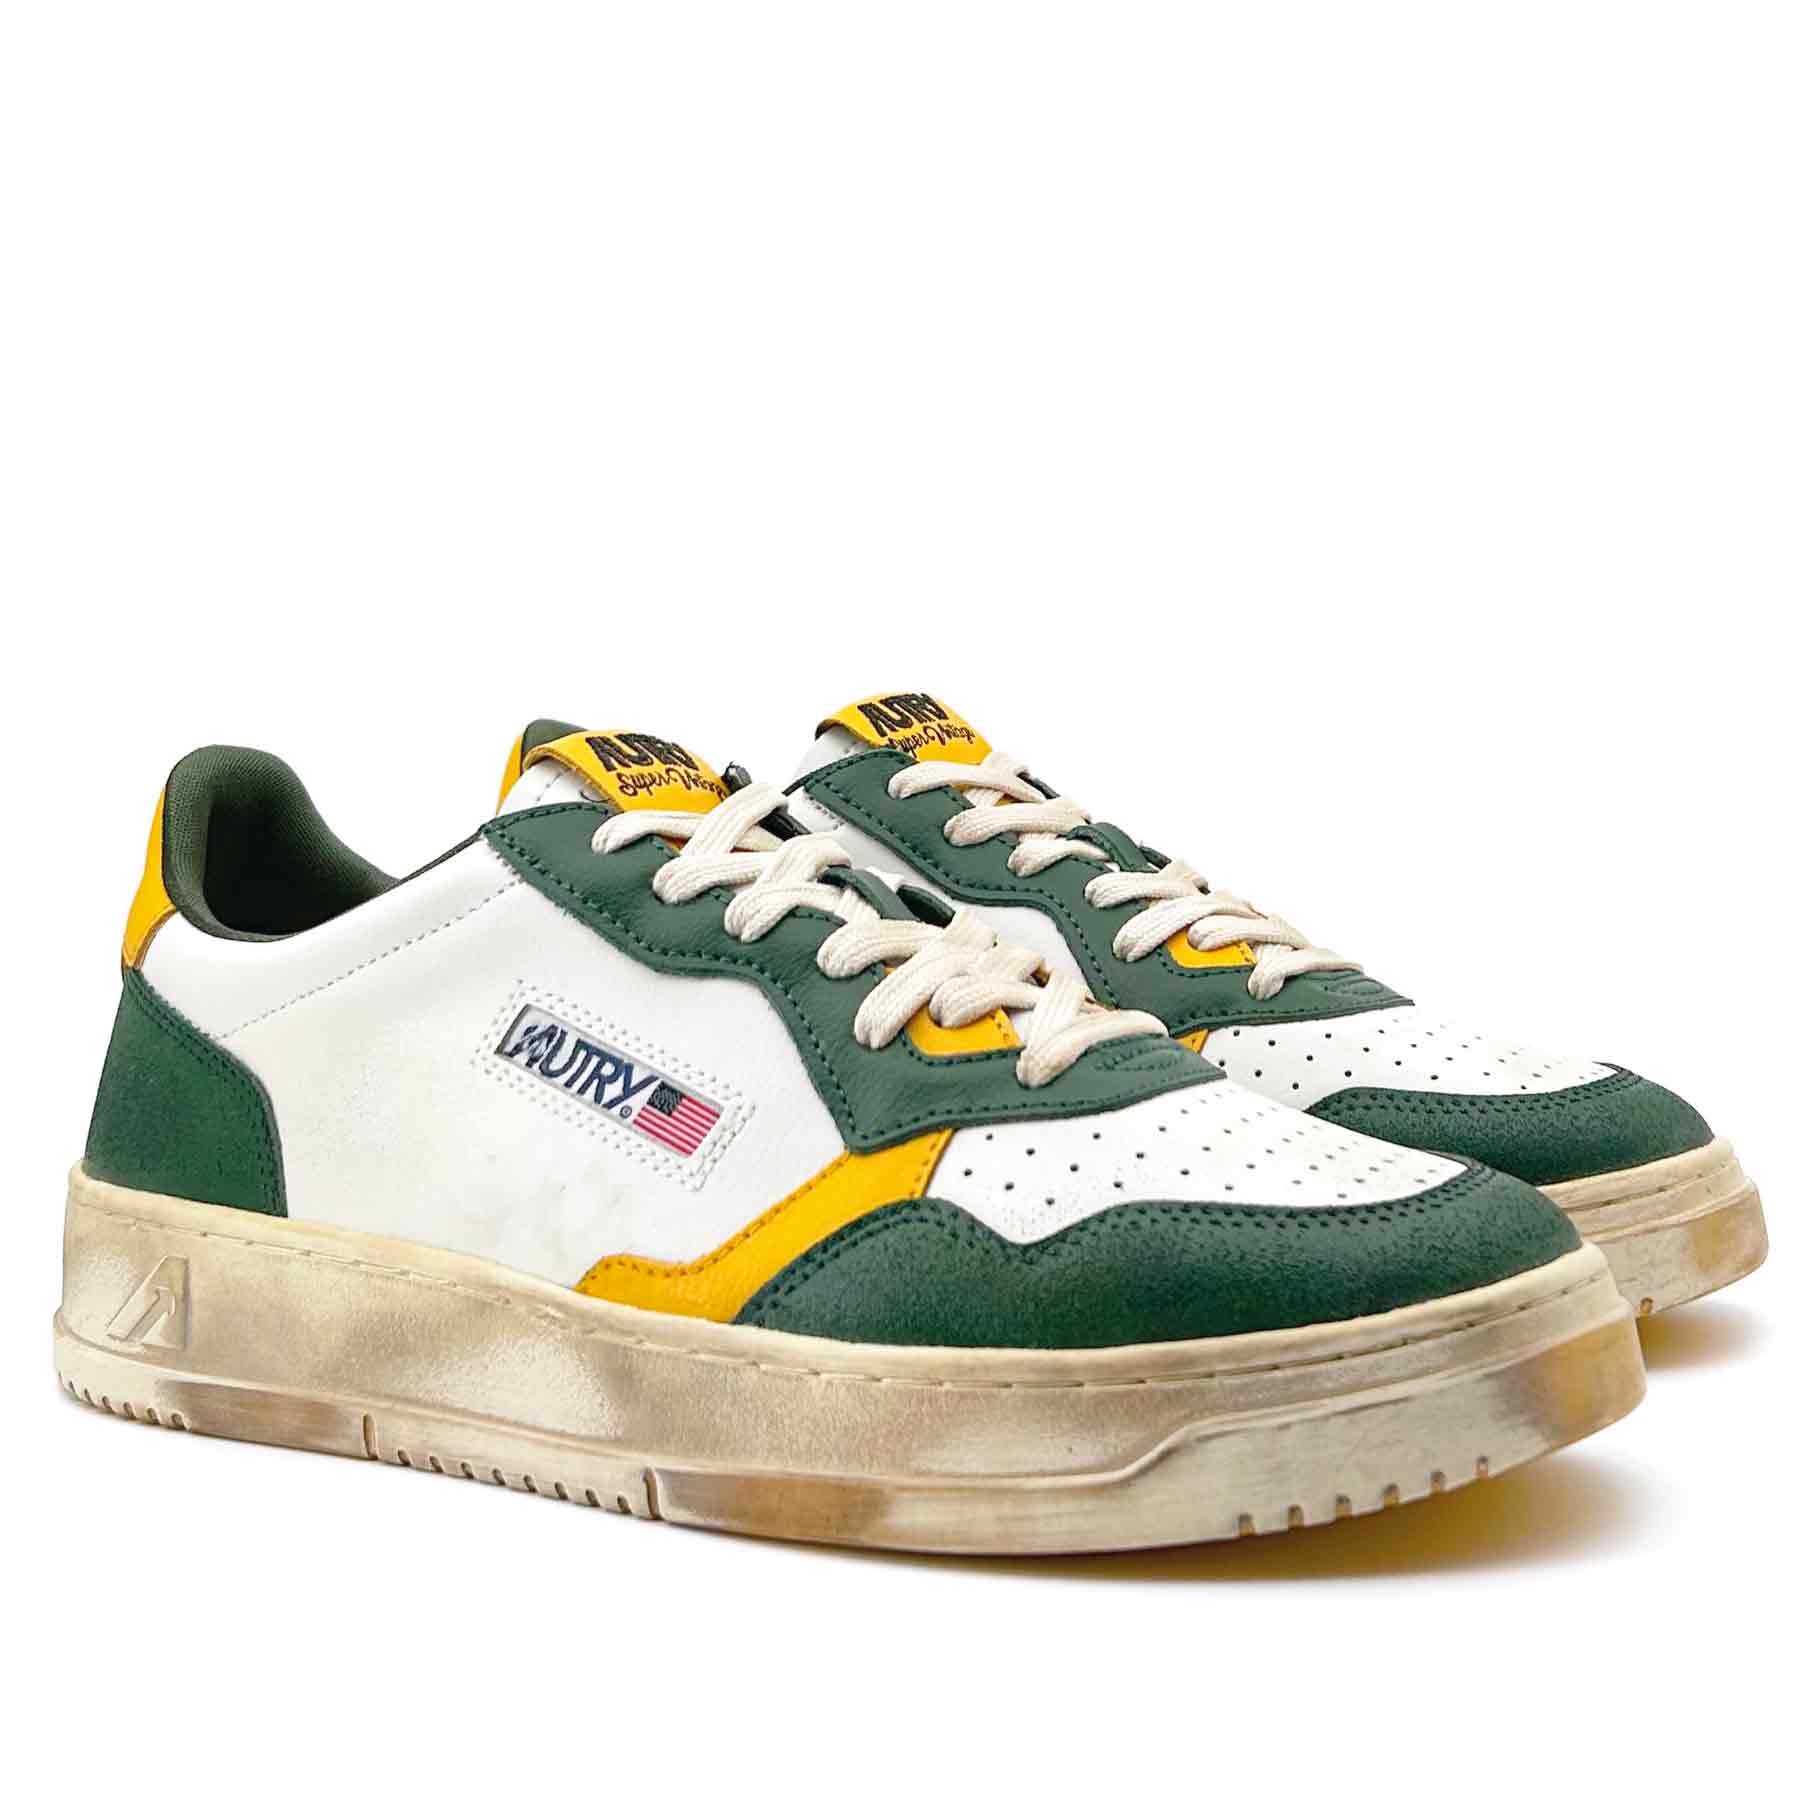 Super Vintage Low Man Leather Green Yellow White